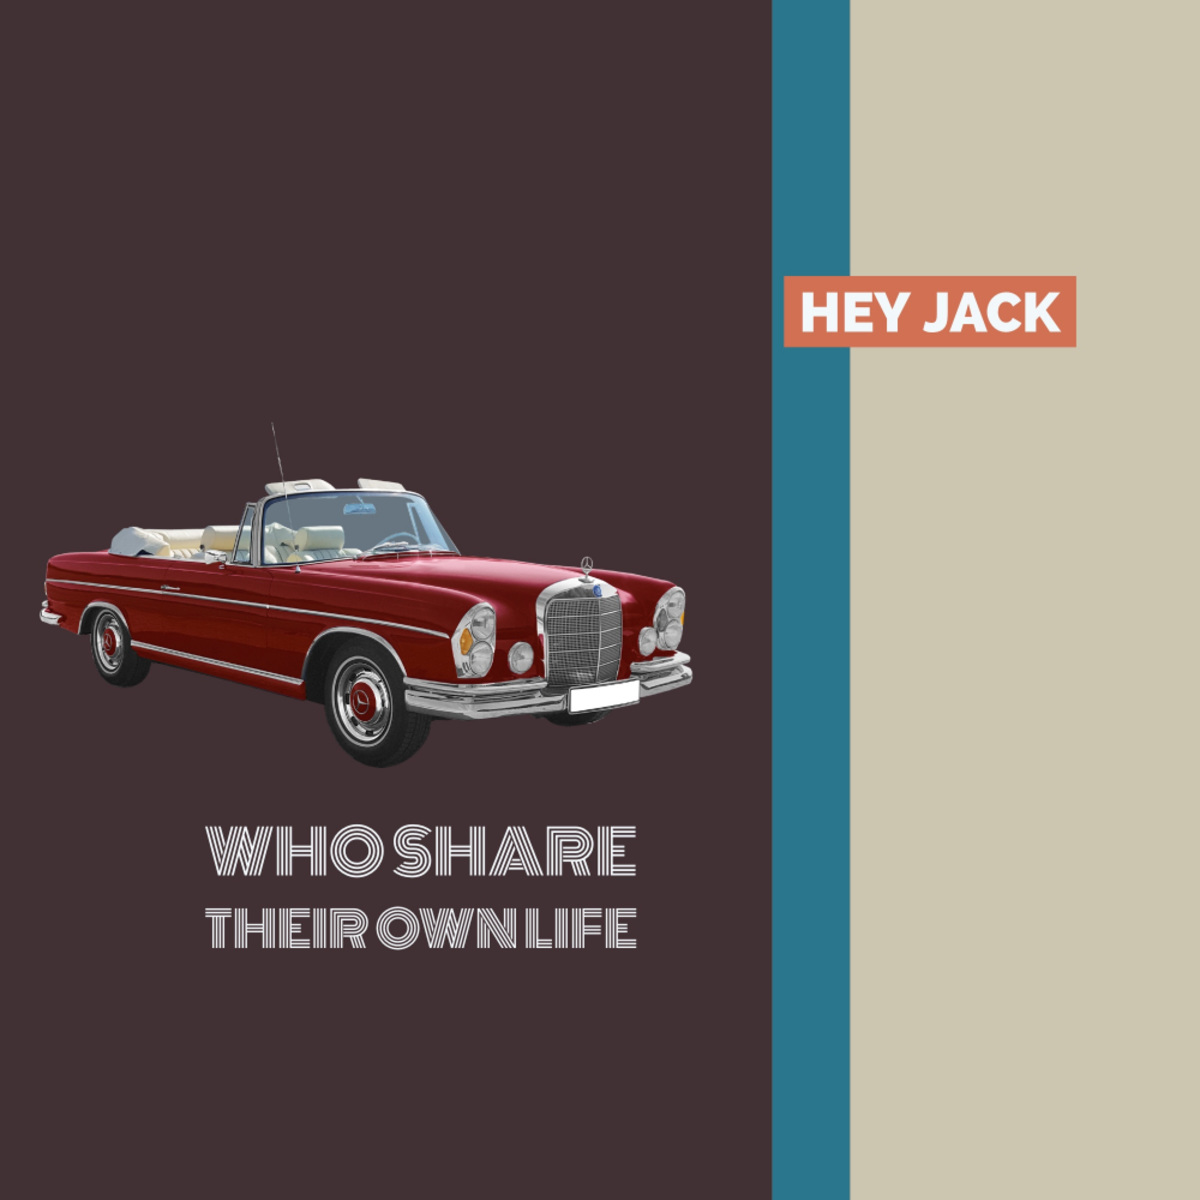 Hey Jack - Who Share Their Own Life / MCT Luxury